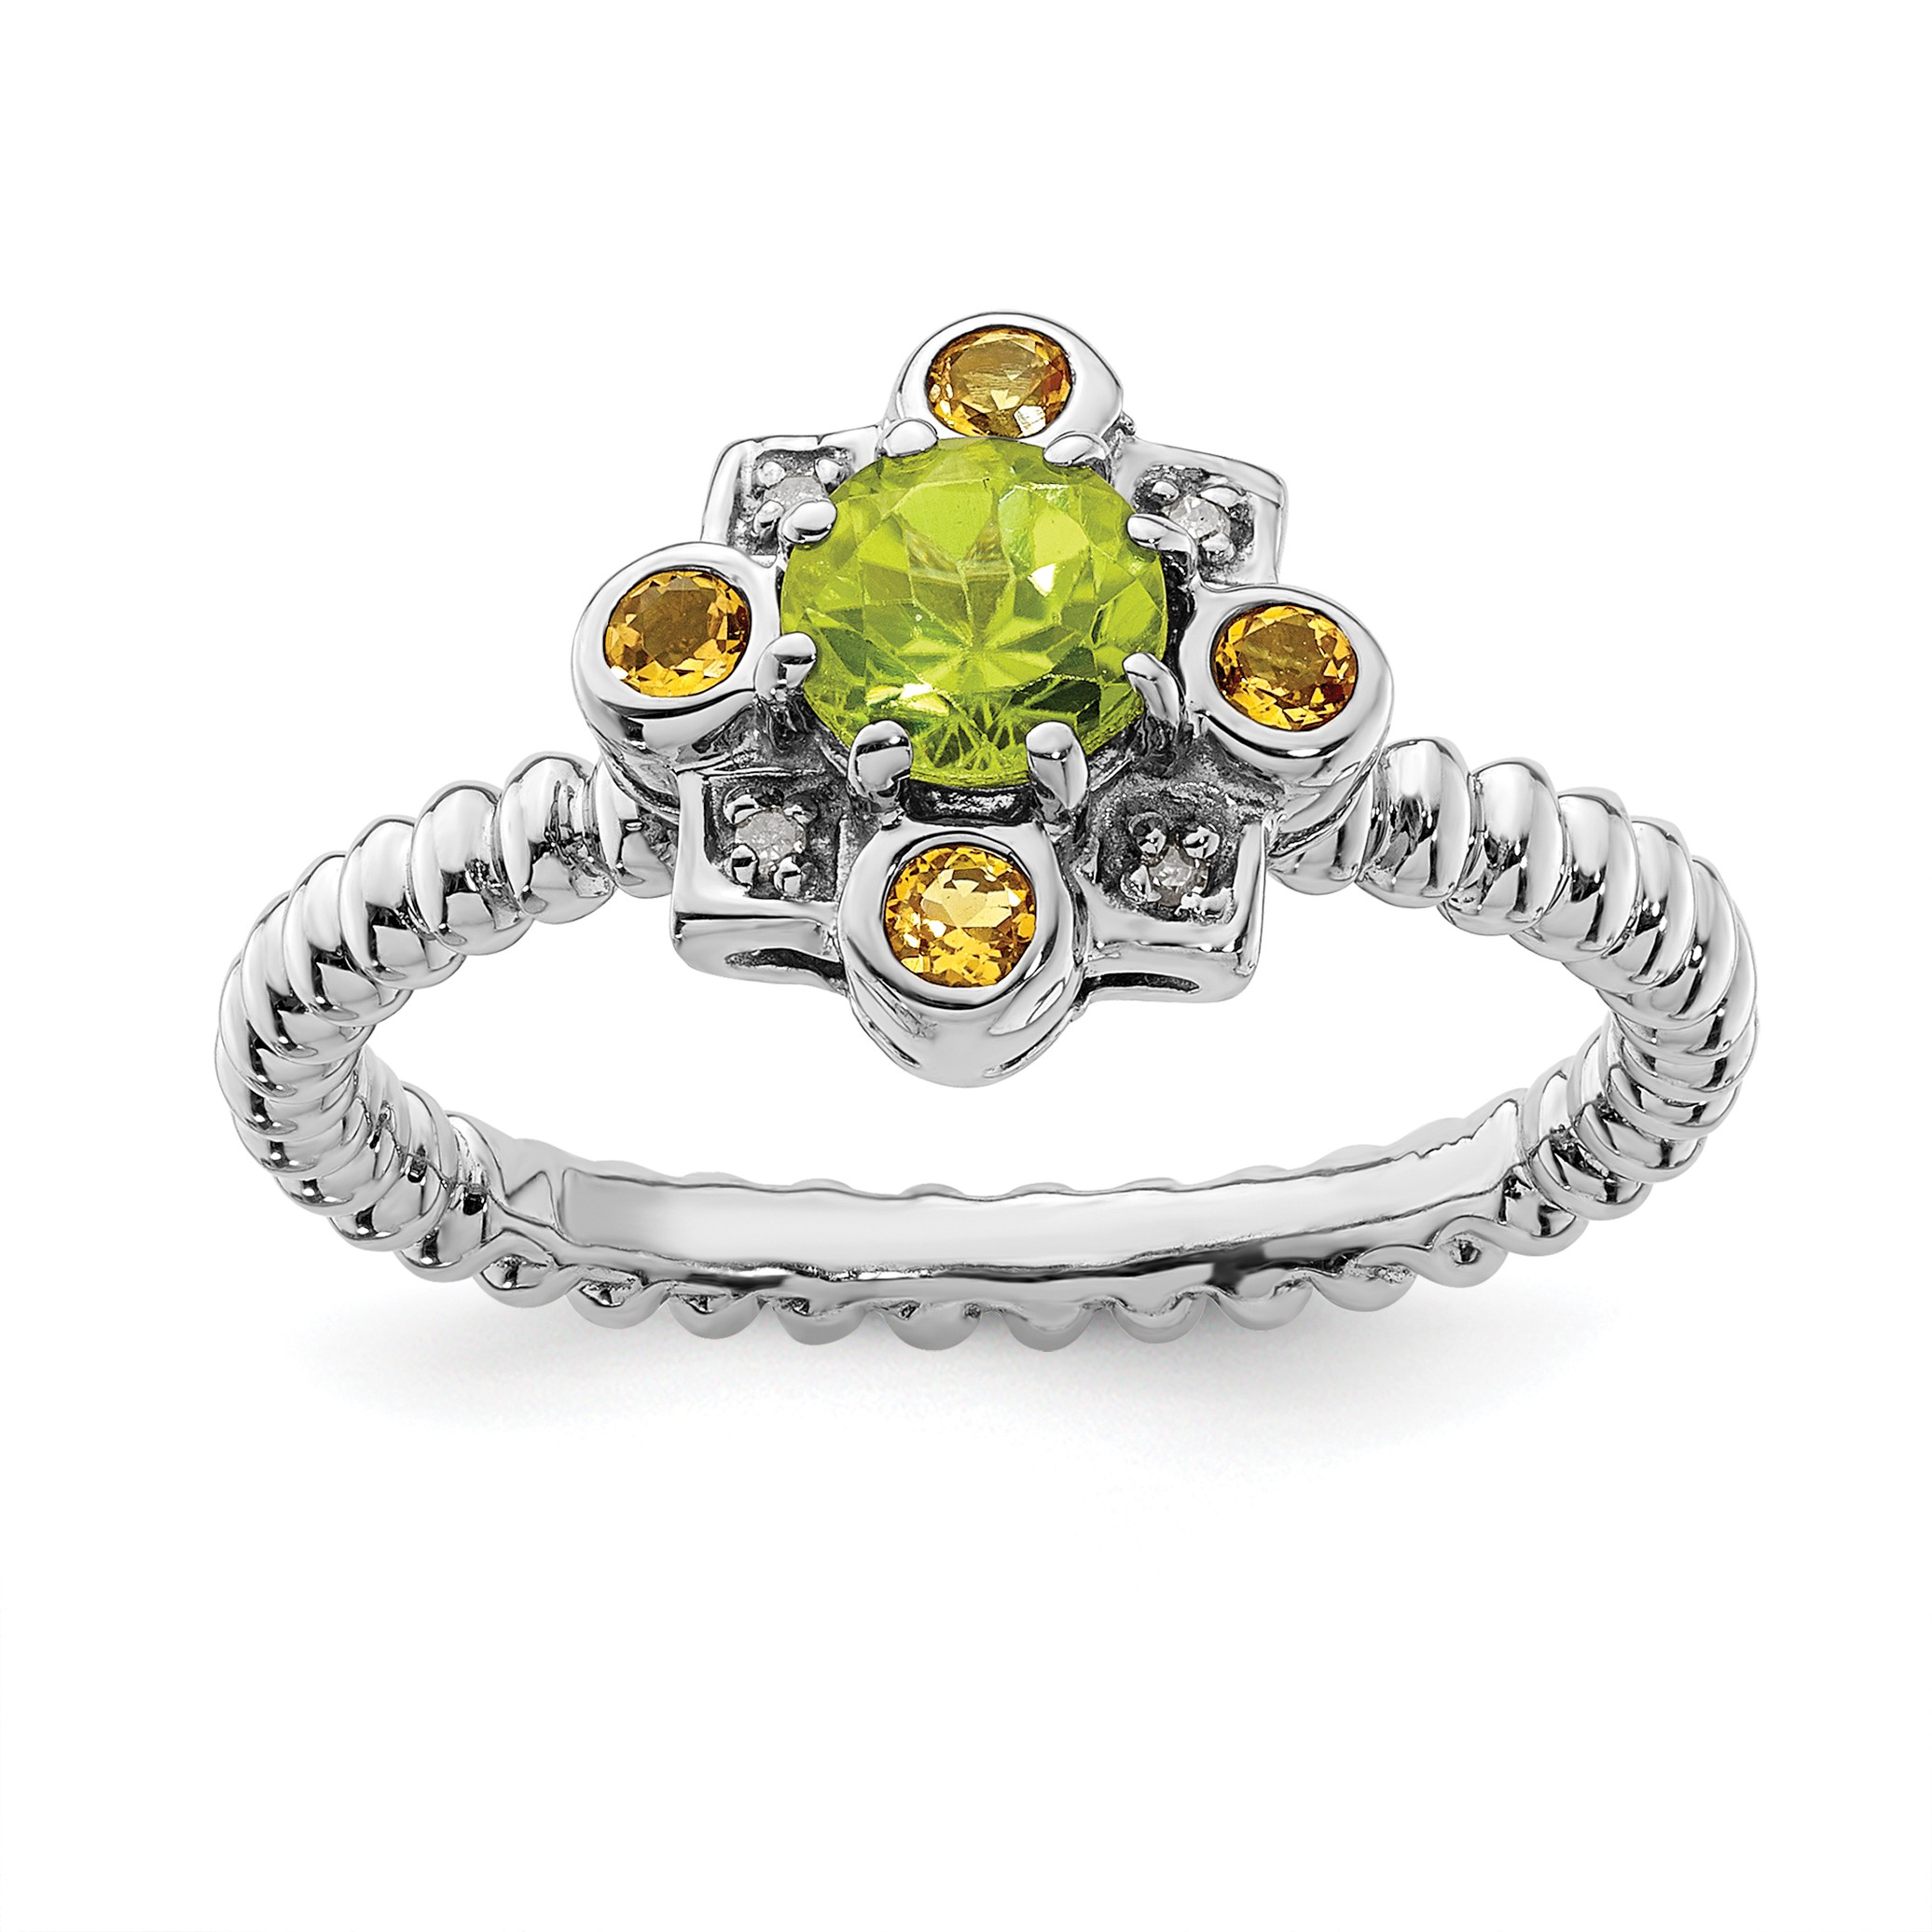 Stackable Expressions Sterling Silver Stackable Expressions Peridot, Citrine & Diamond Ring